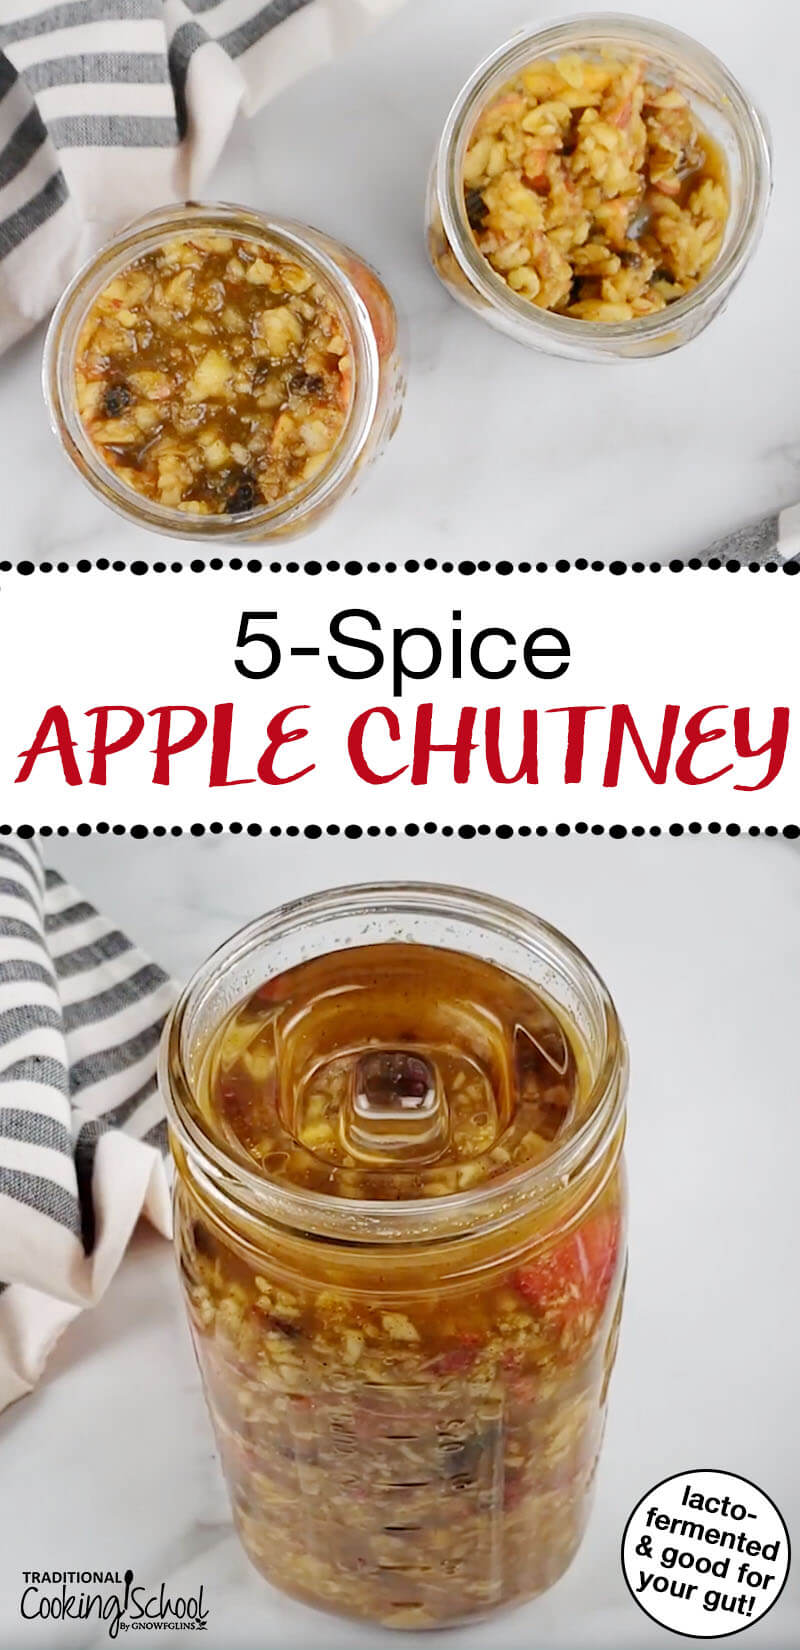 Pinterest Pin includes to images of mason jars filled with Lacto-Fermented Apple Chutney and a fermenting weight inside the jar. Text overlay says, "5-Spice Apple Chutney - lacto-fermented & good for your gut!"